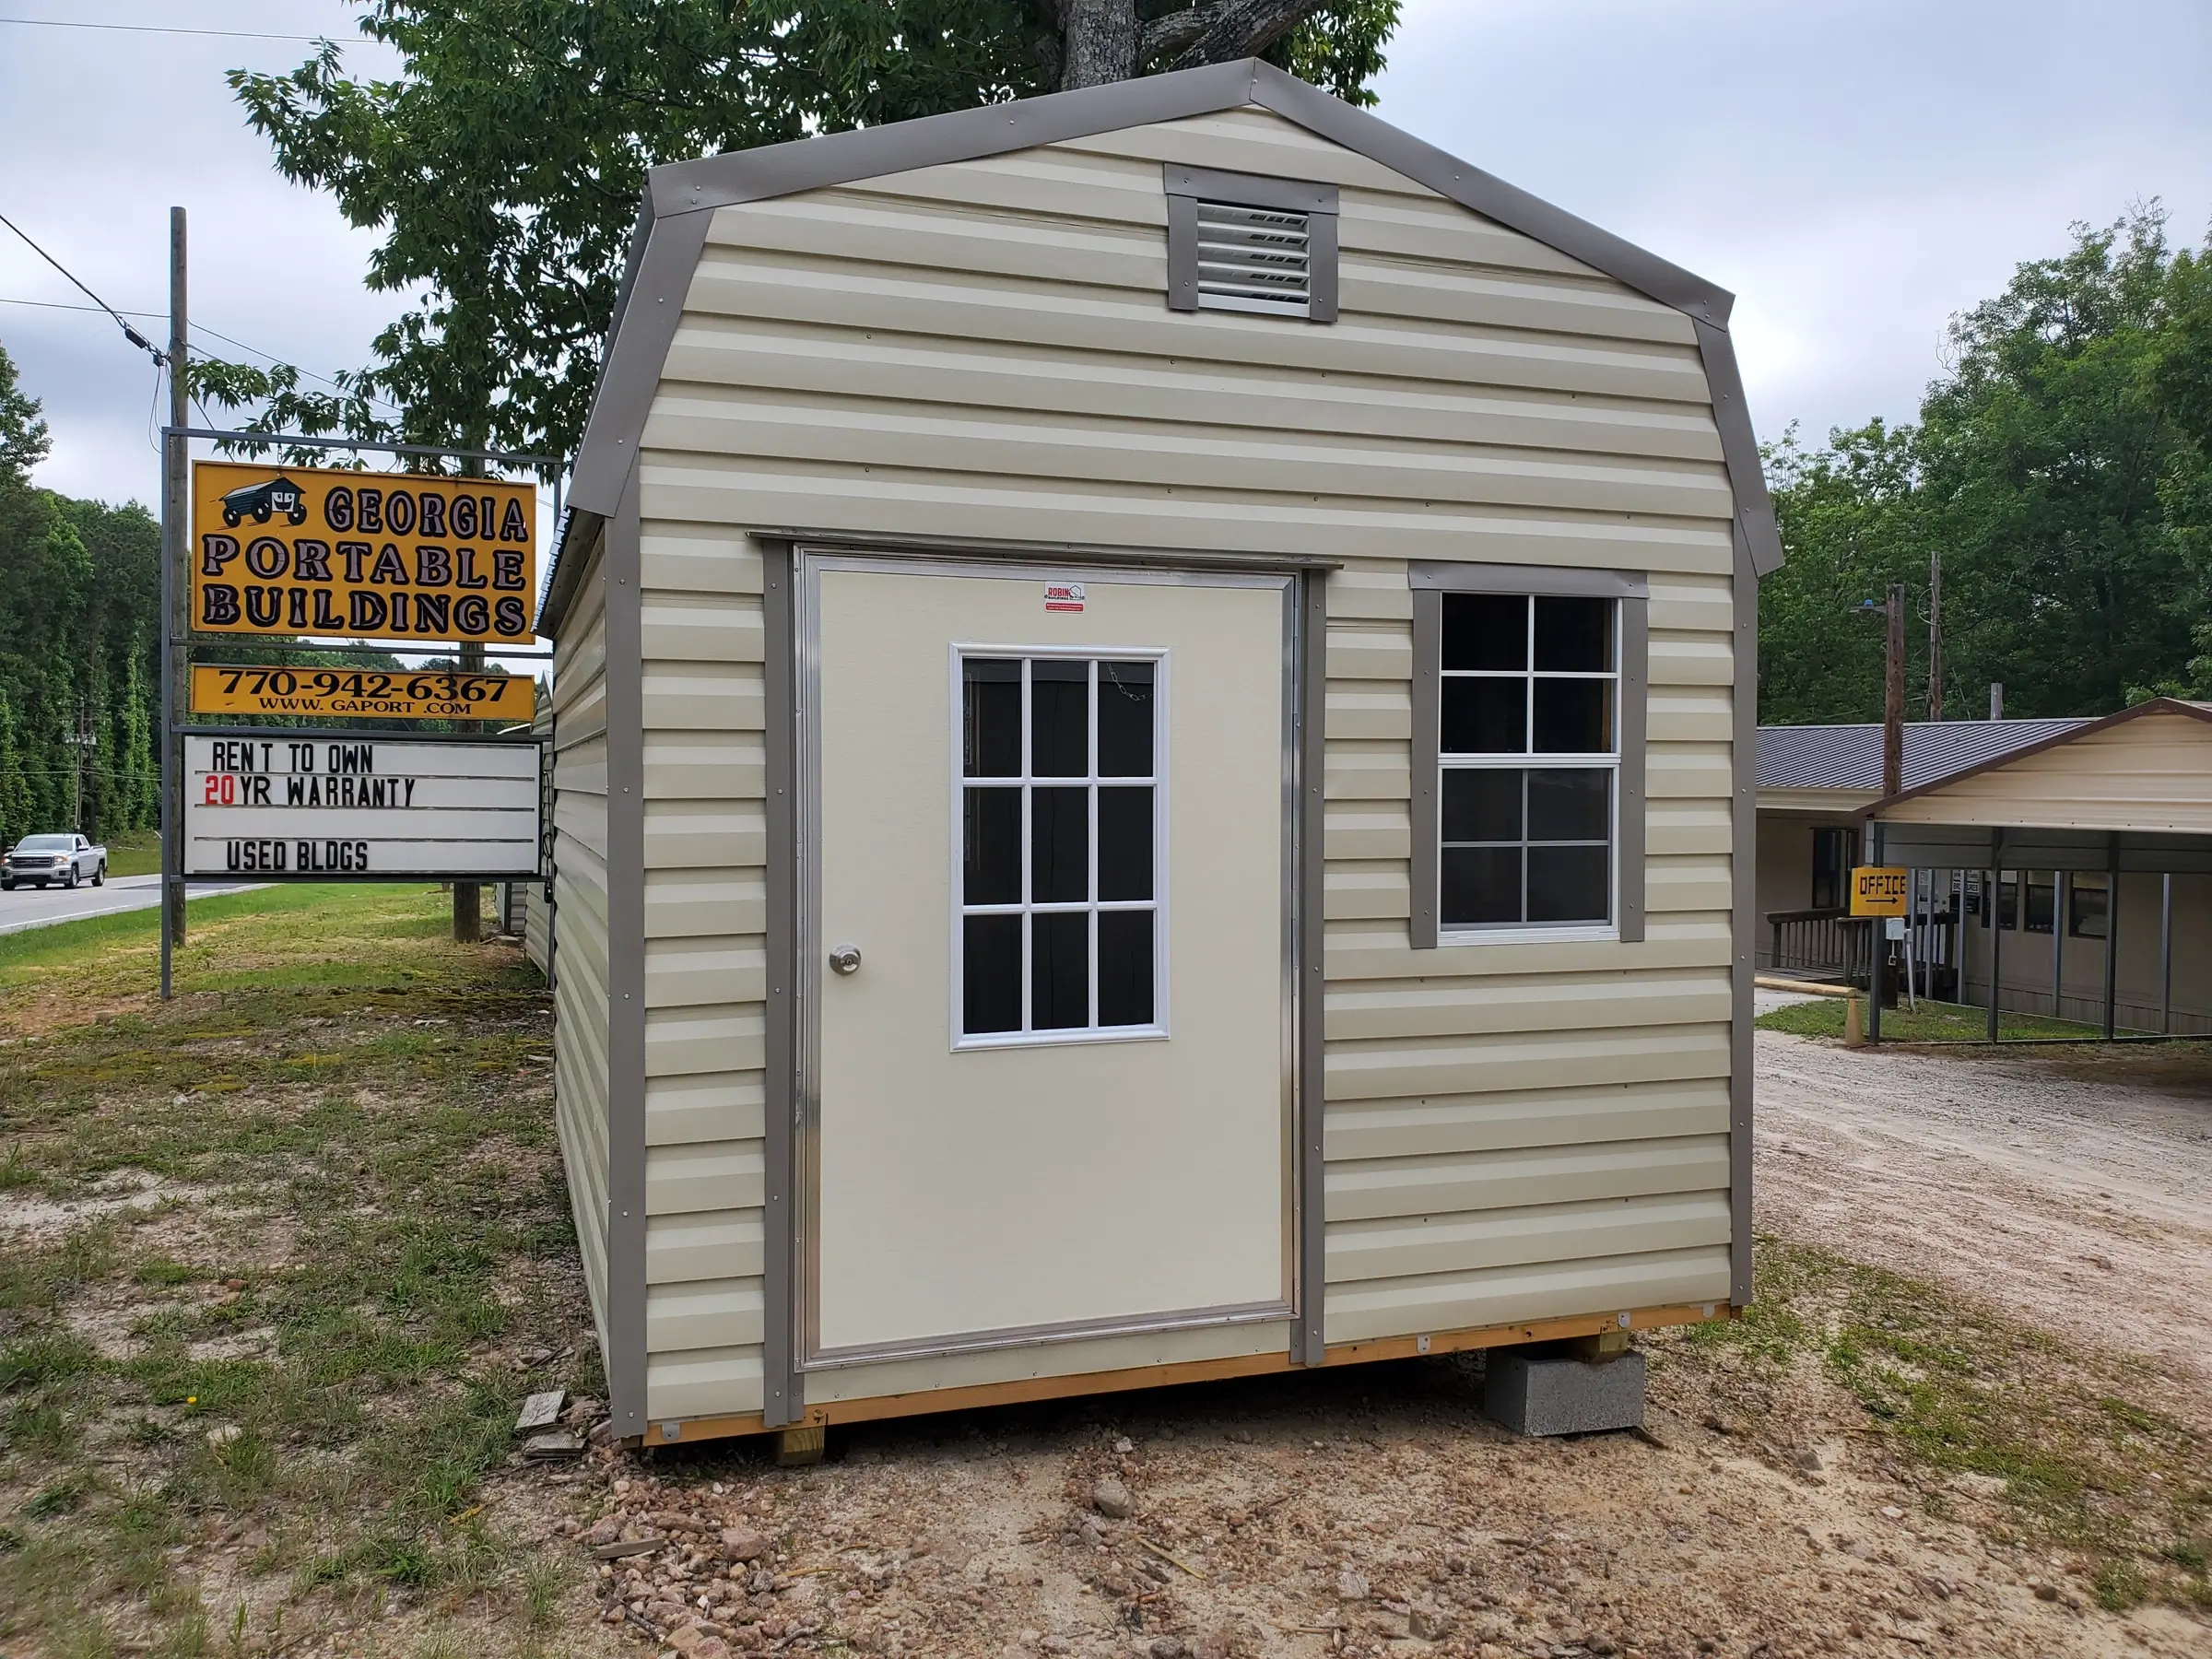 10 by 12 gambrel barn portable structure building with window, vent and nine light door.